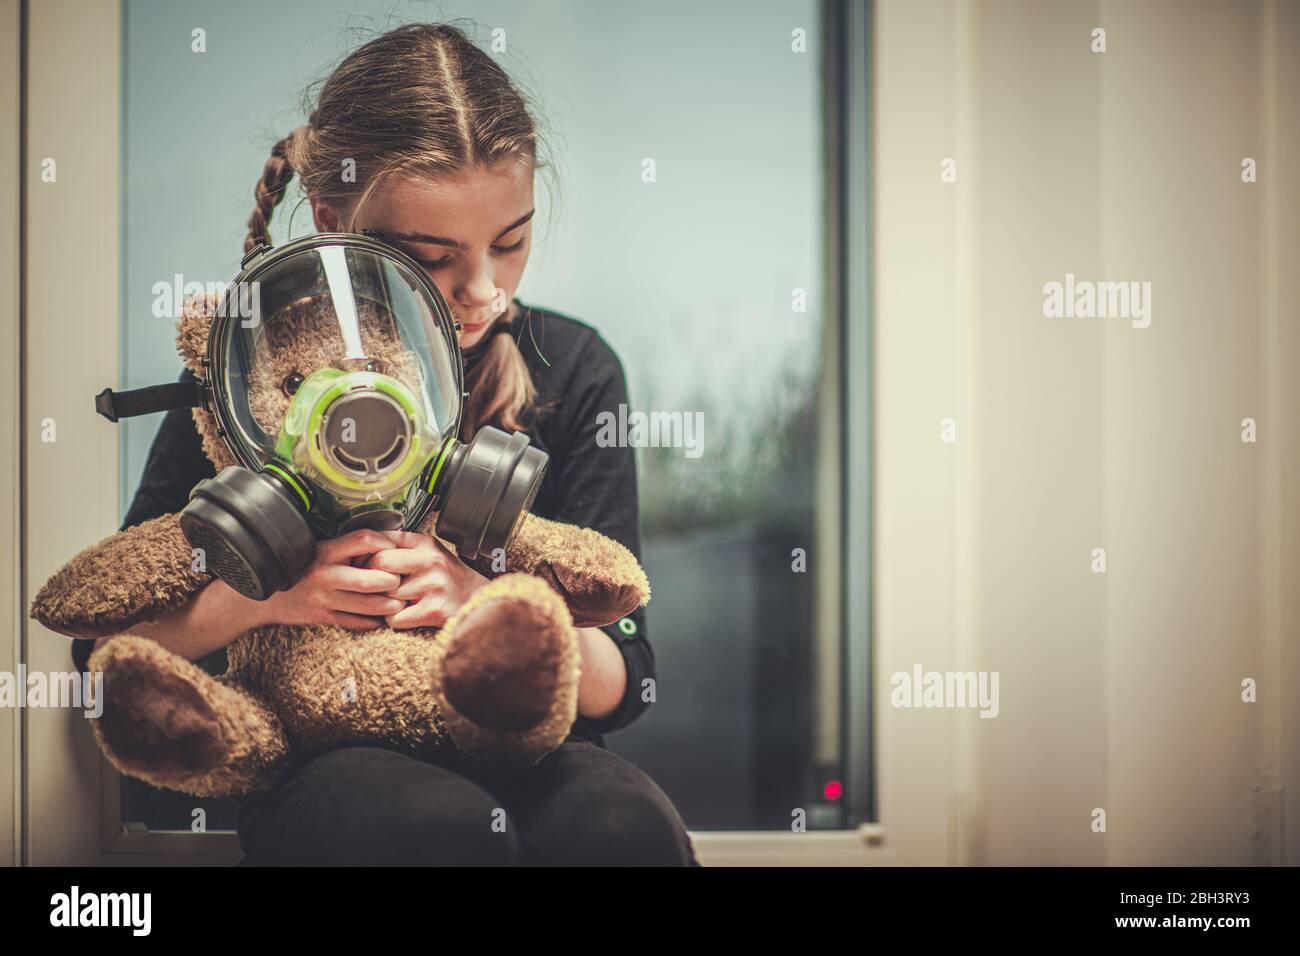 Female Child Sitting By Window Hugging Teddy Bear With Respiratory Mask On. Stock Photo